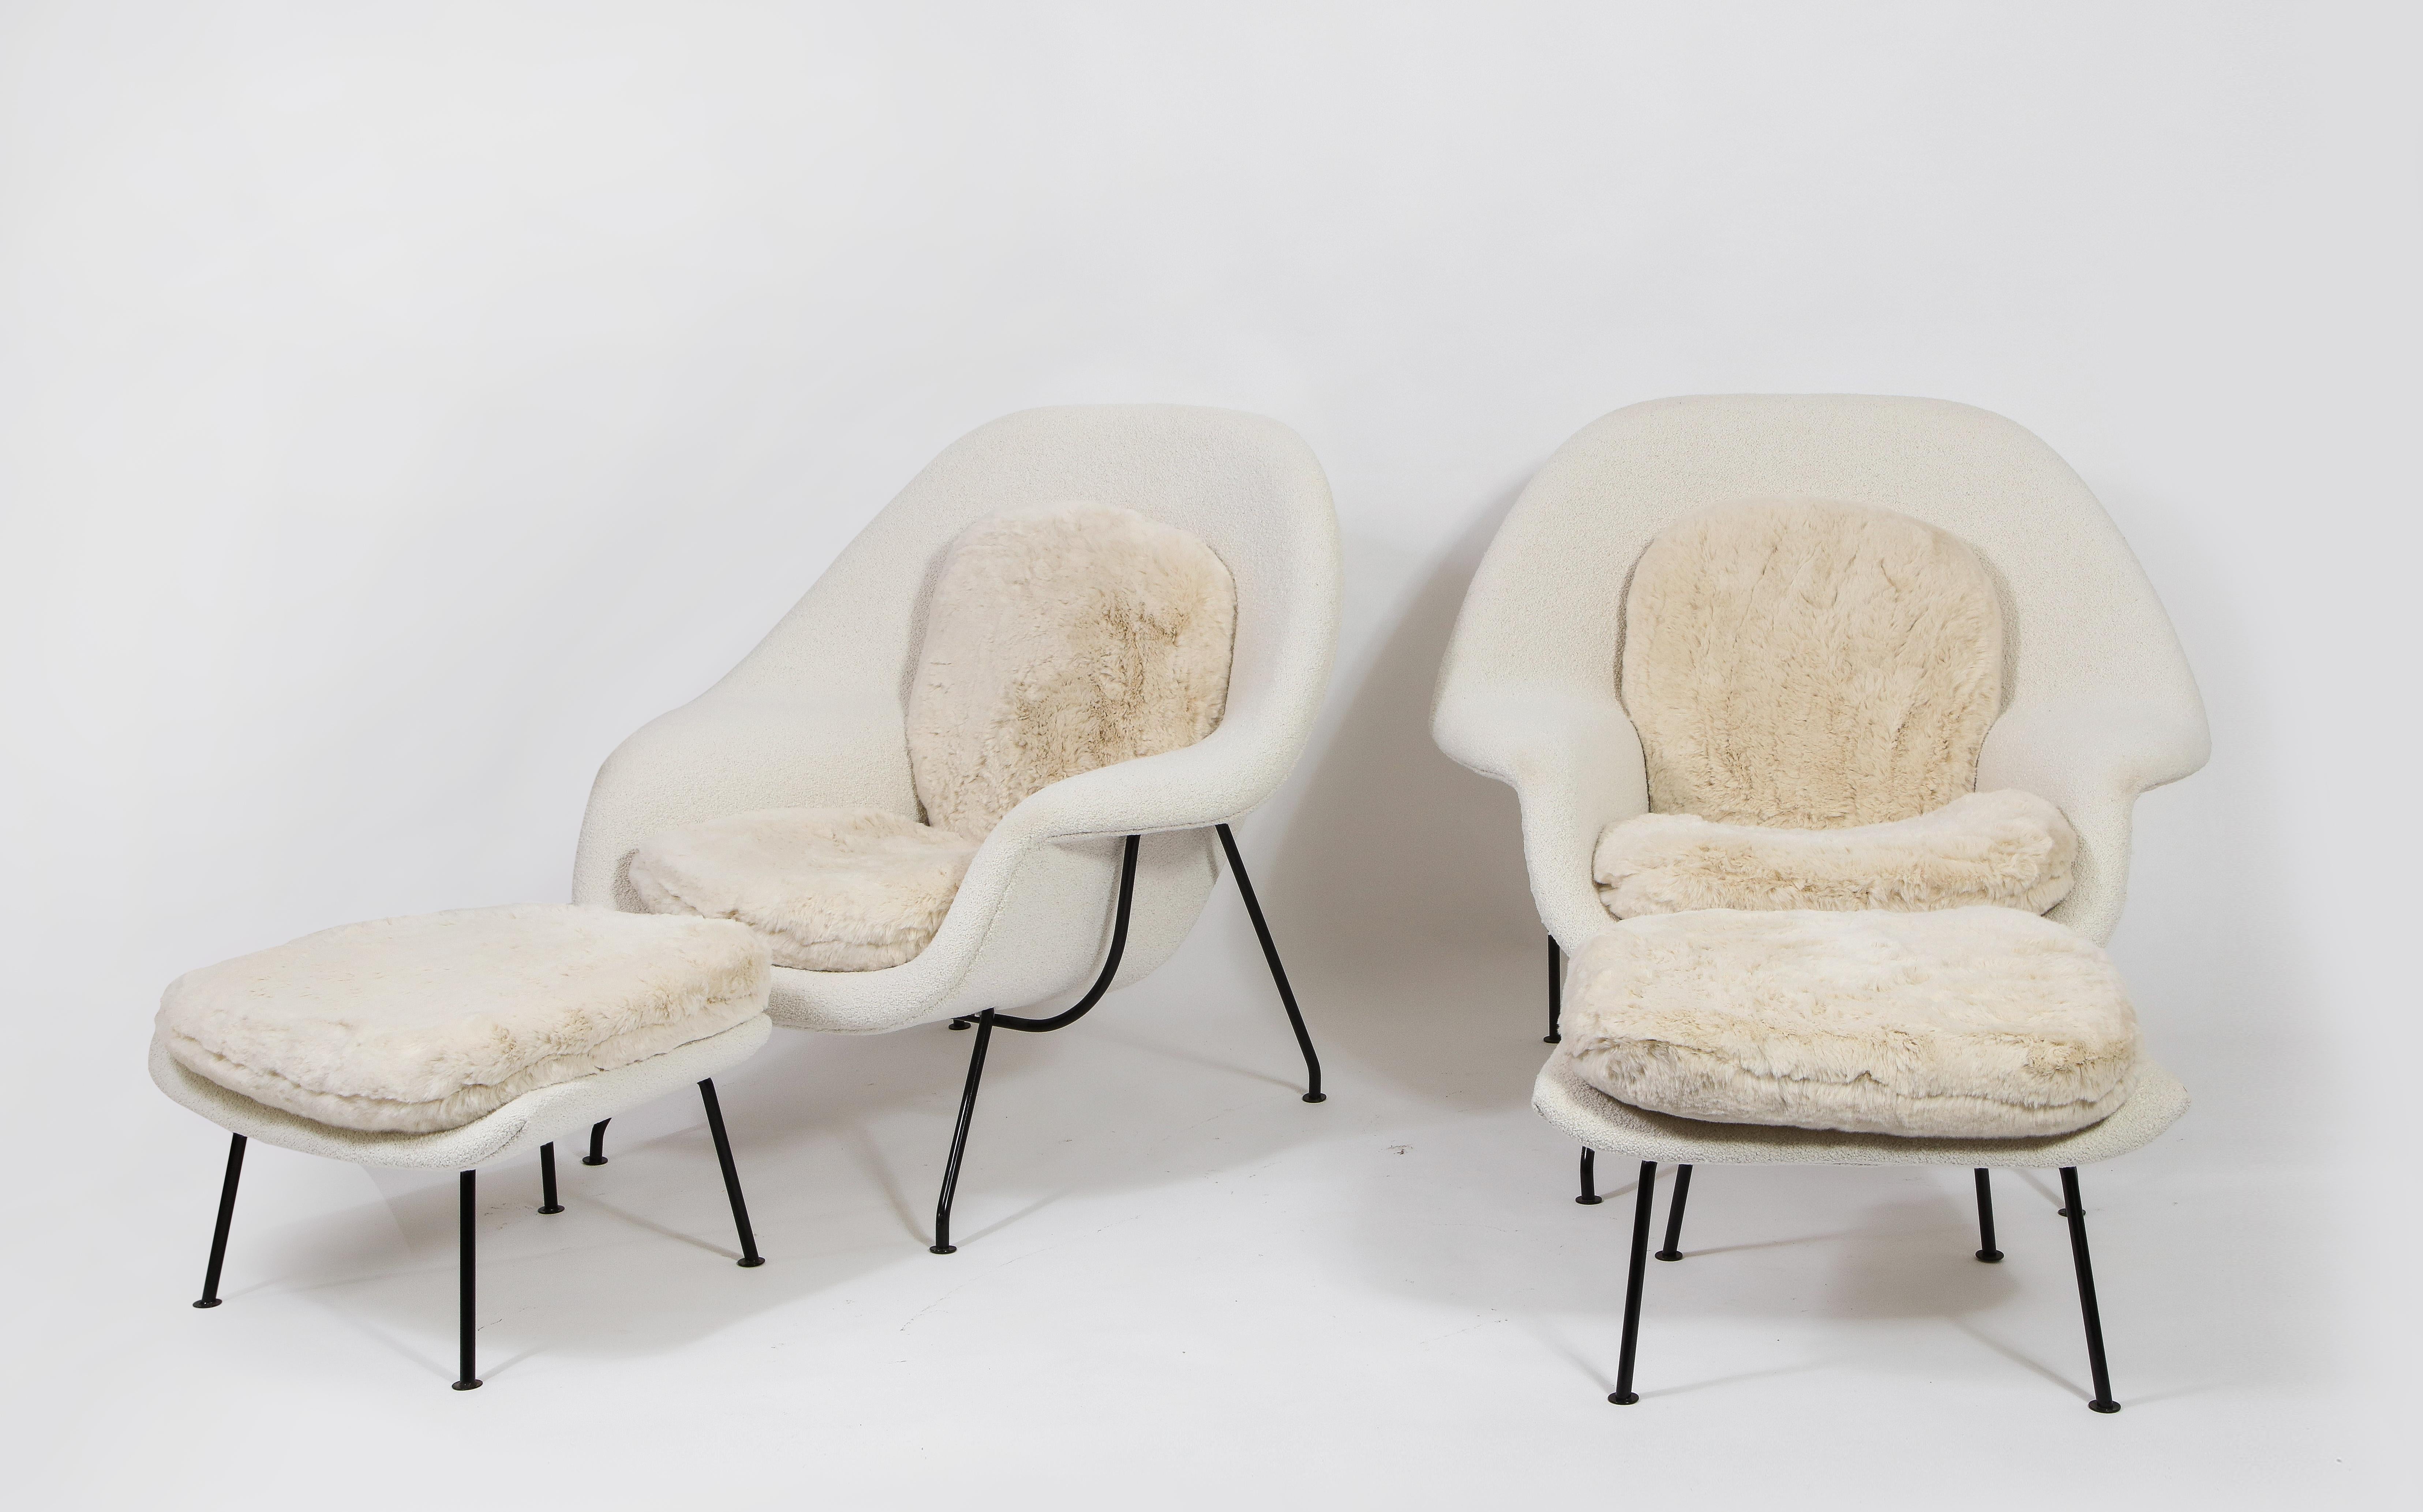 Eero Saarinen for Knoll Pair of Two-Tone Womb Chairs with Ottomans, USA 1955 For Sale 4